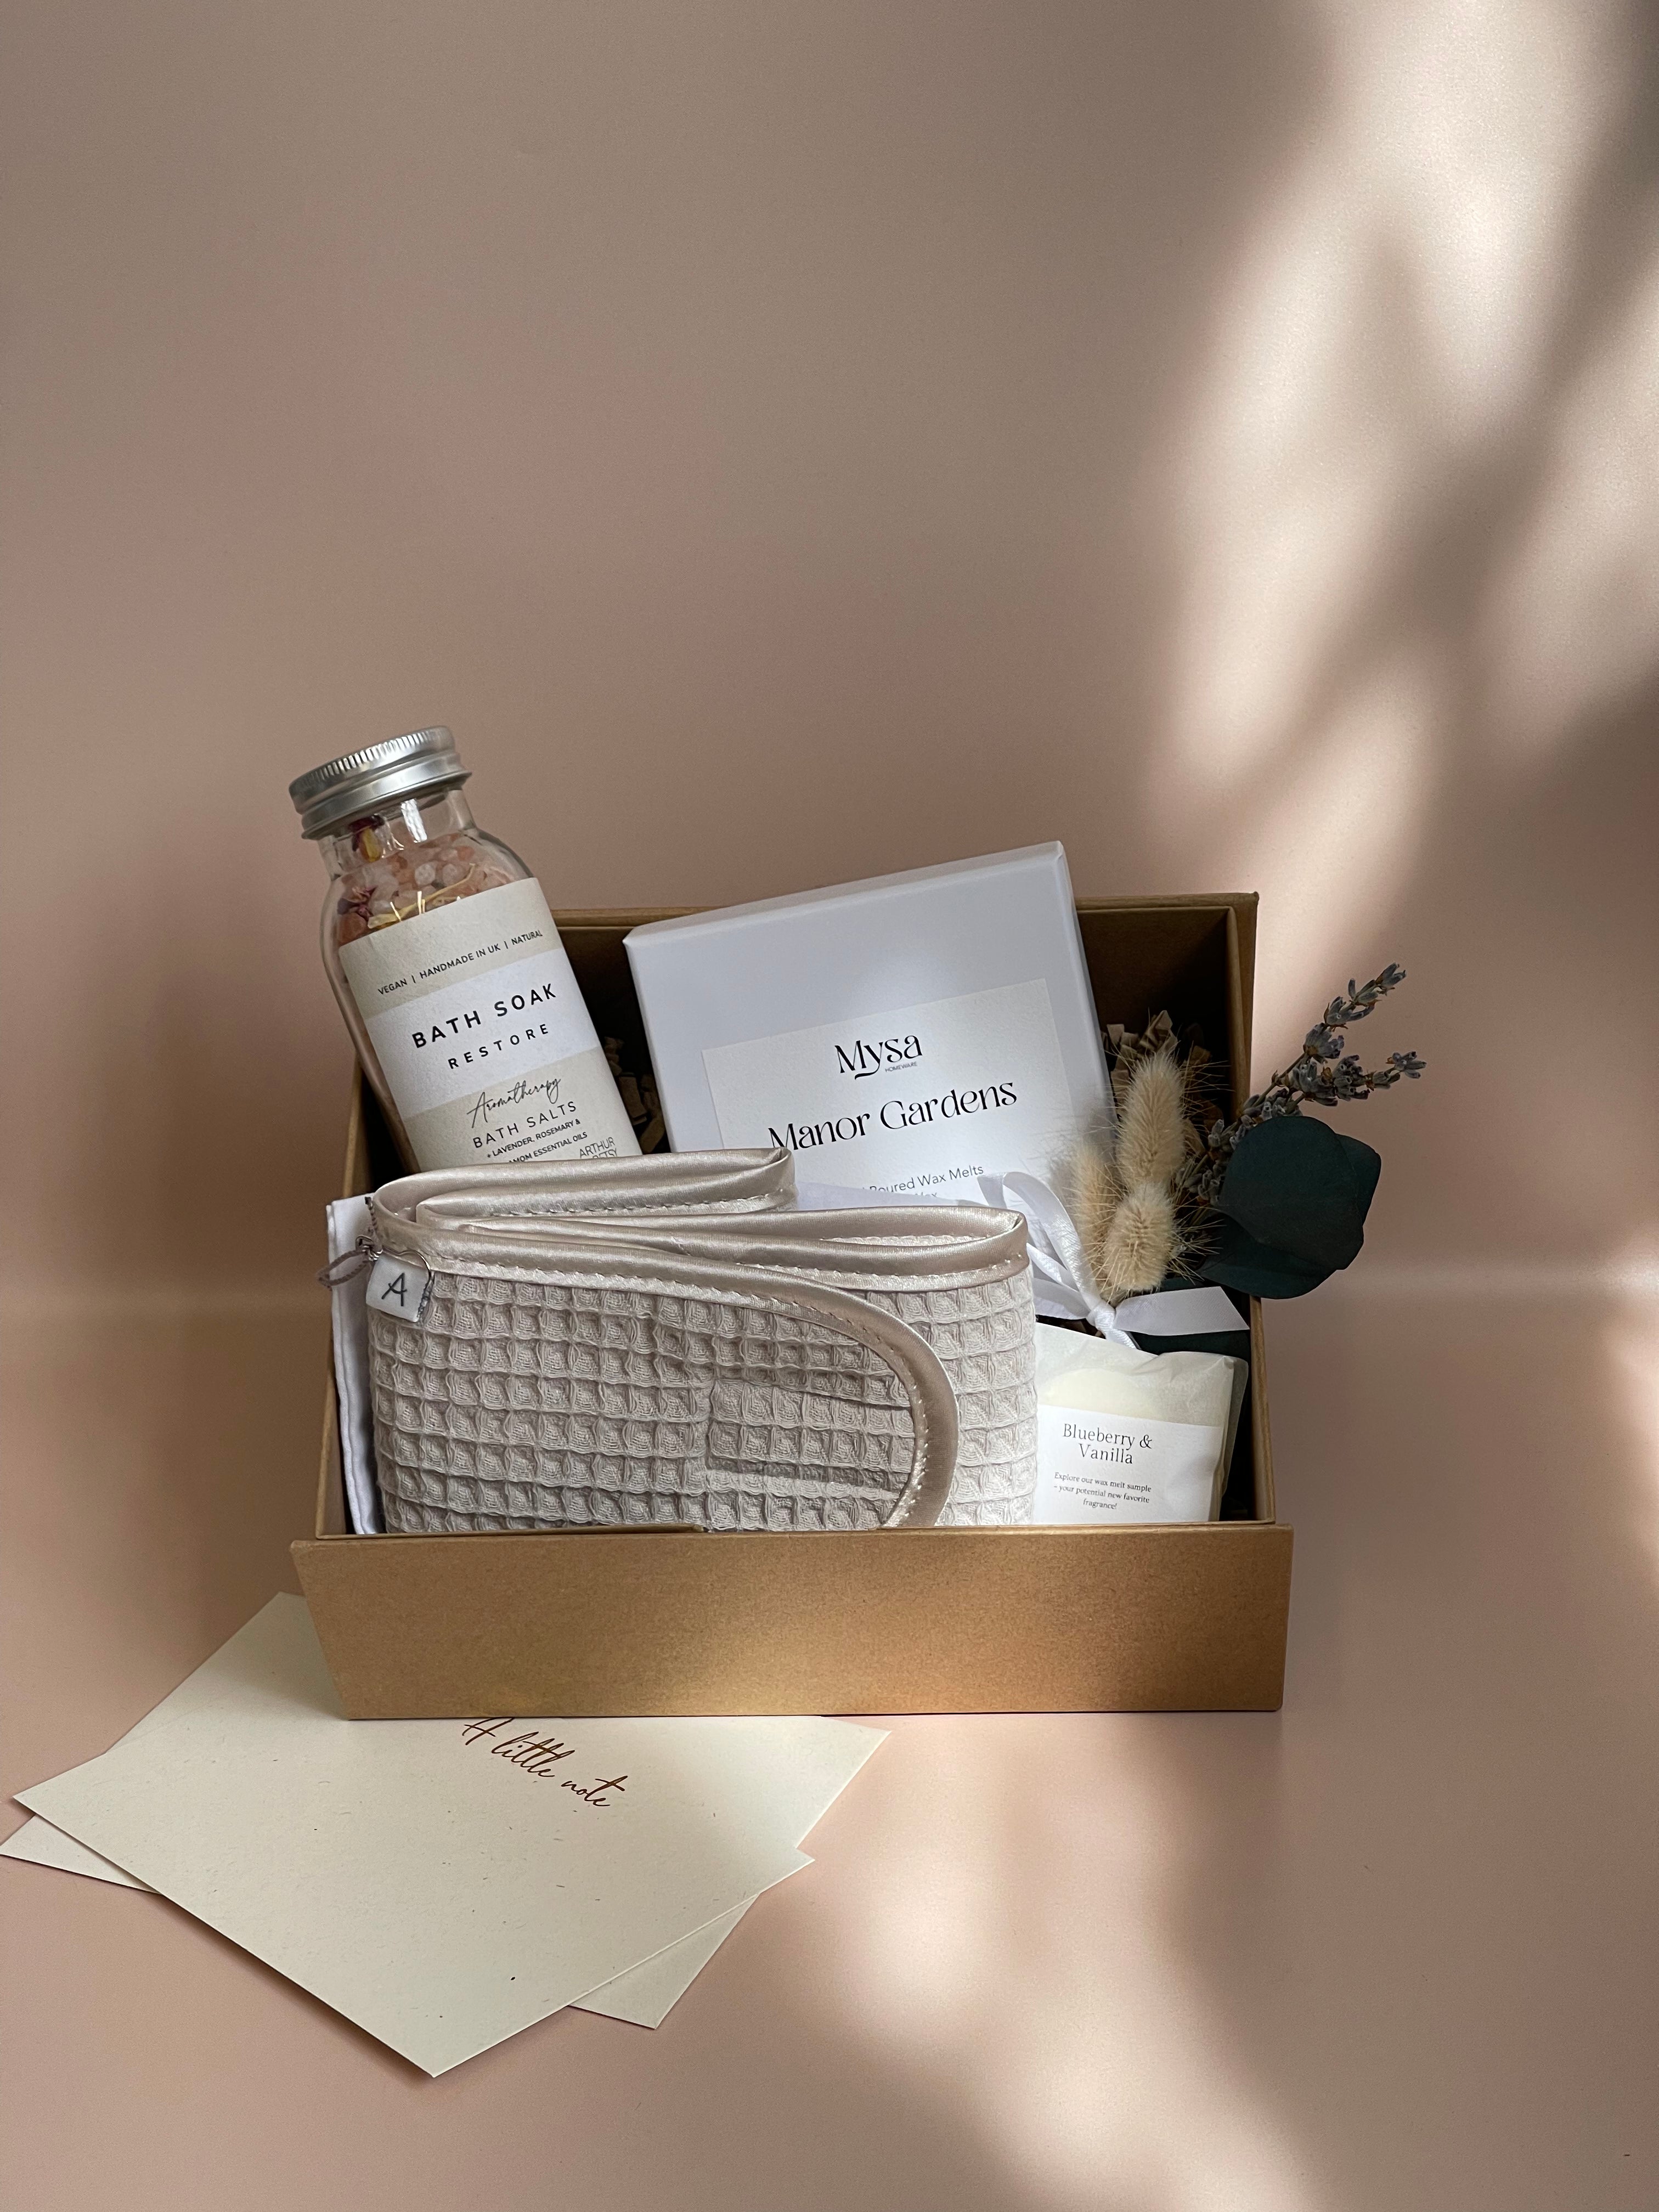 Wellbeing gift set featuring curated items to promote relaxation and self-care, ideal for gifting or personal indulgence.